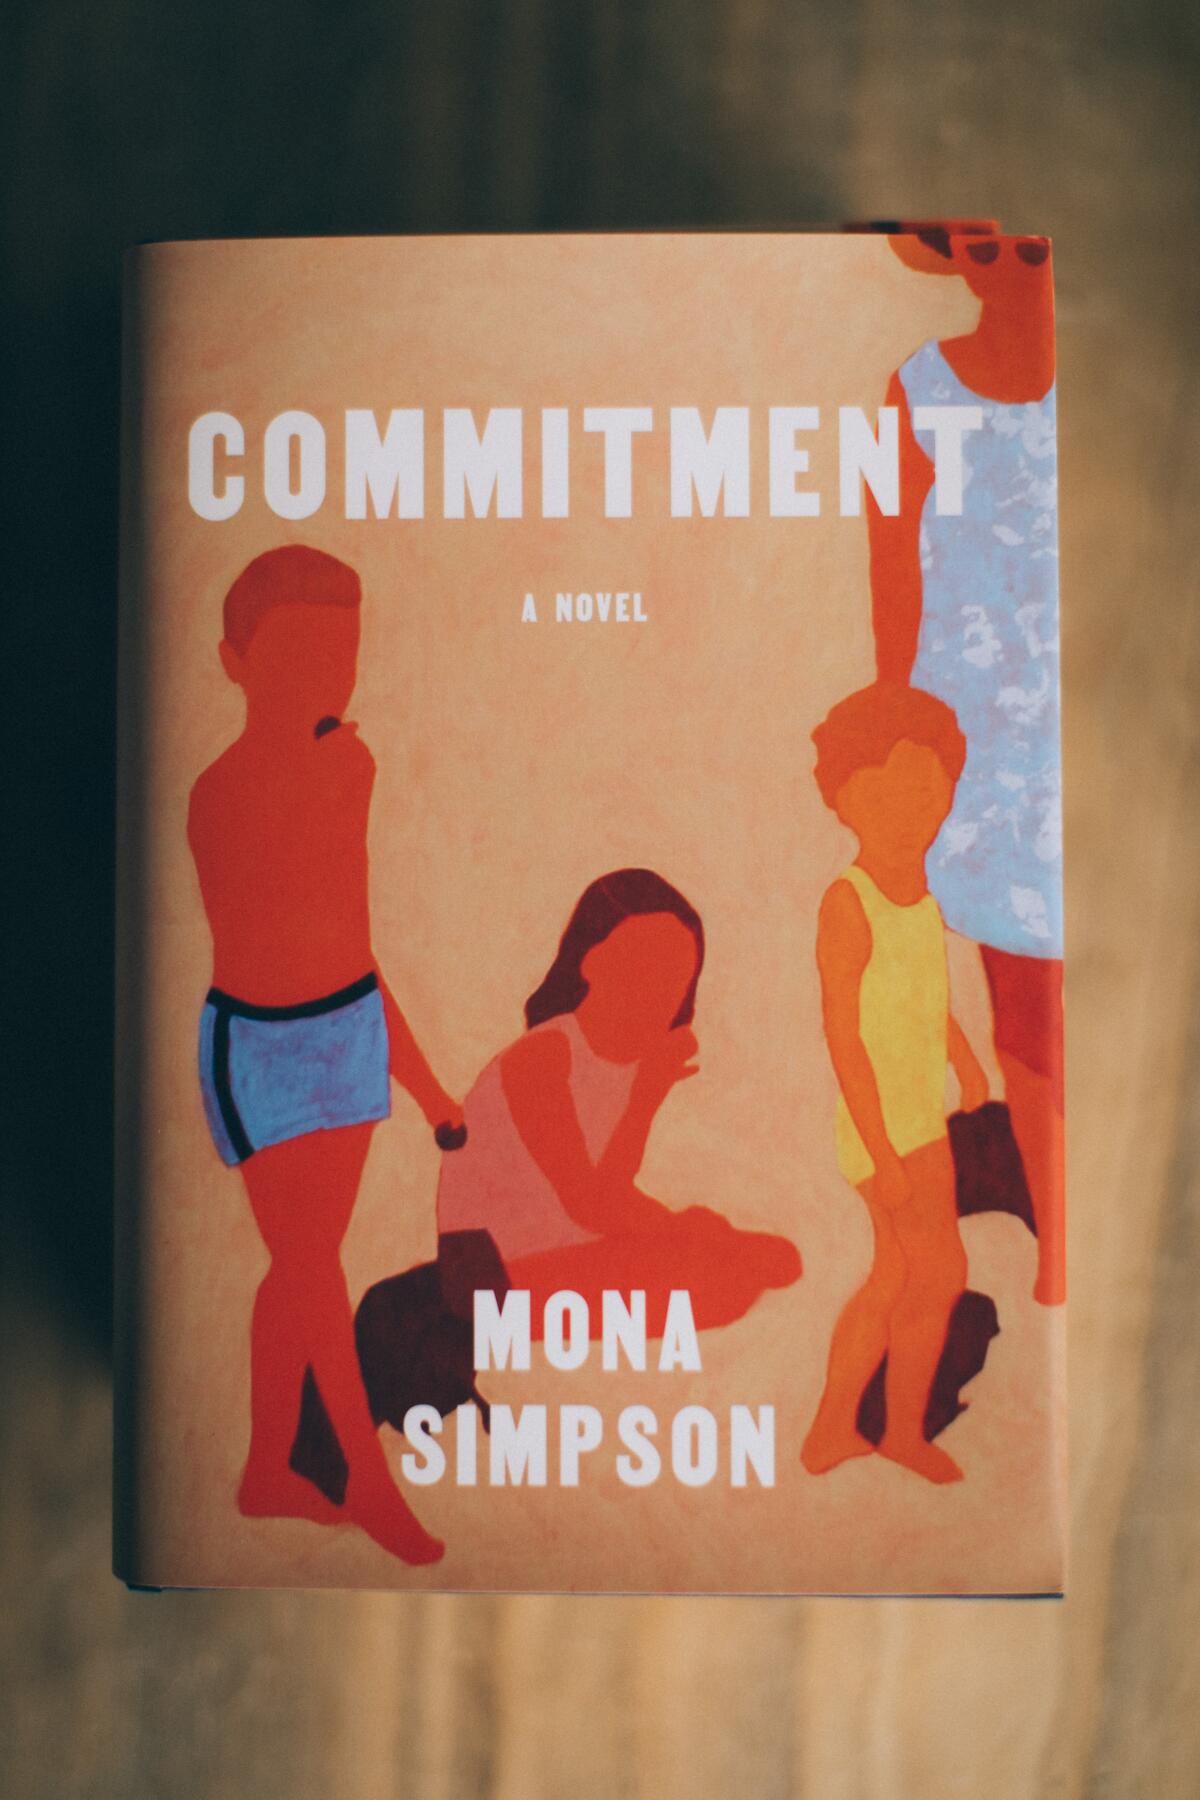 The book "Commitment" by Mona Simpson.